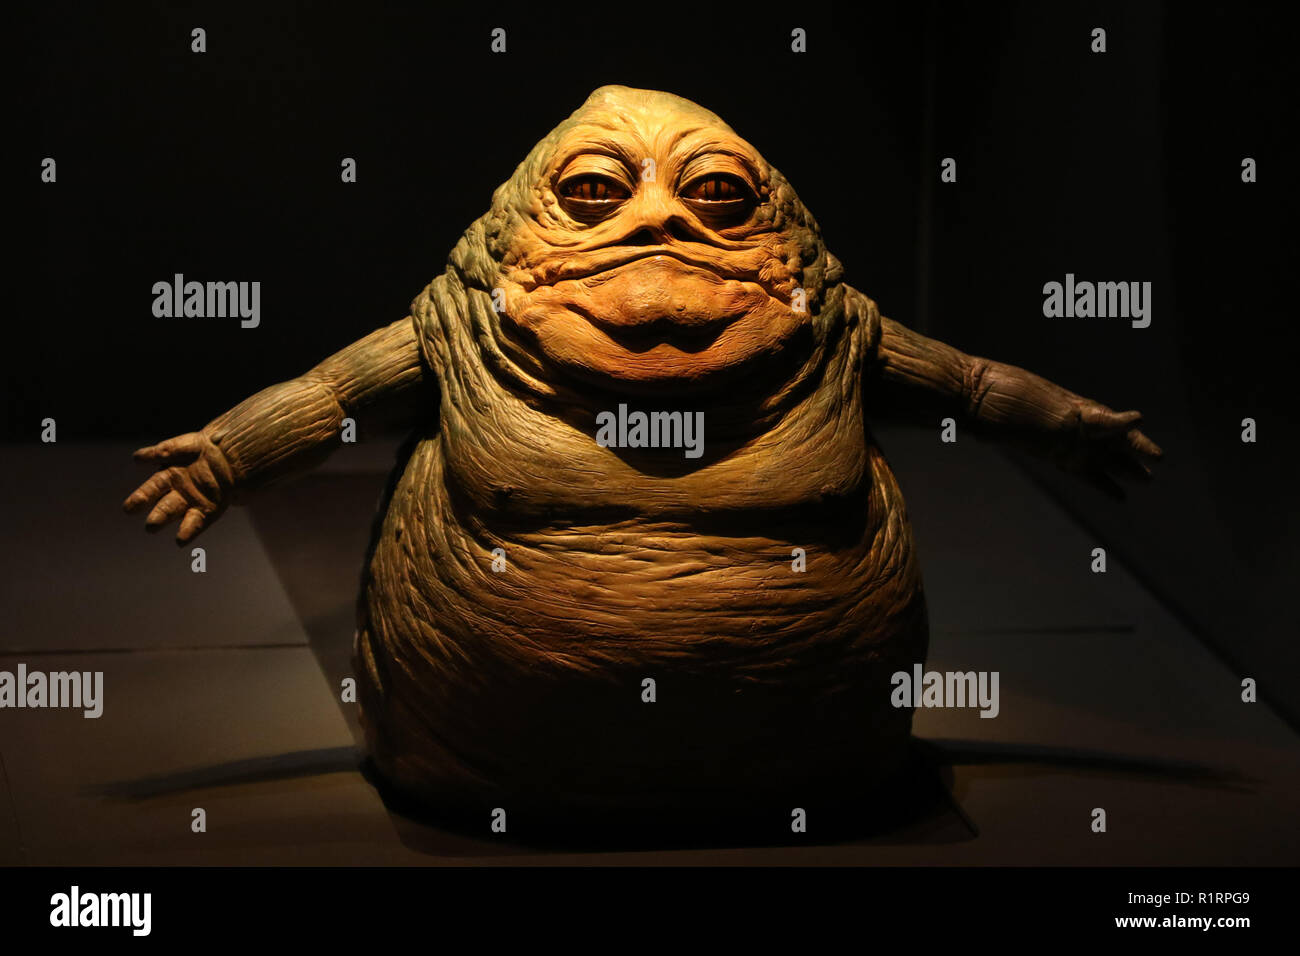 Sydney, Australia. 15 November 2018. Media preview of STAR WARS Identities: The Exhibition at the Powerhouse Museum. Pictured: Jabba the Hutt, model from Star Wars: Episode I The Phantom Menace (1999). This model helped to visualise a younger and slimmer version of Jabba the Hutt who would be needed to preside over the Boonta Eve Podrace. Credit: Richard Milnes/Alamy Live News Stock Photo